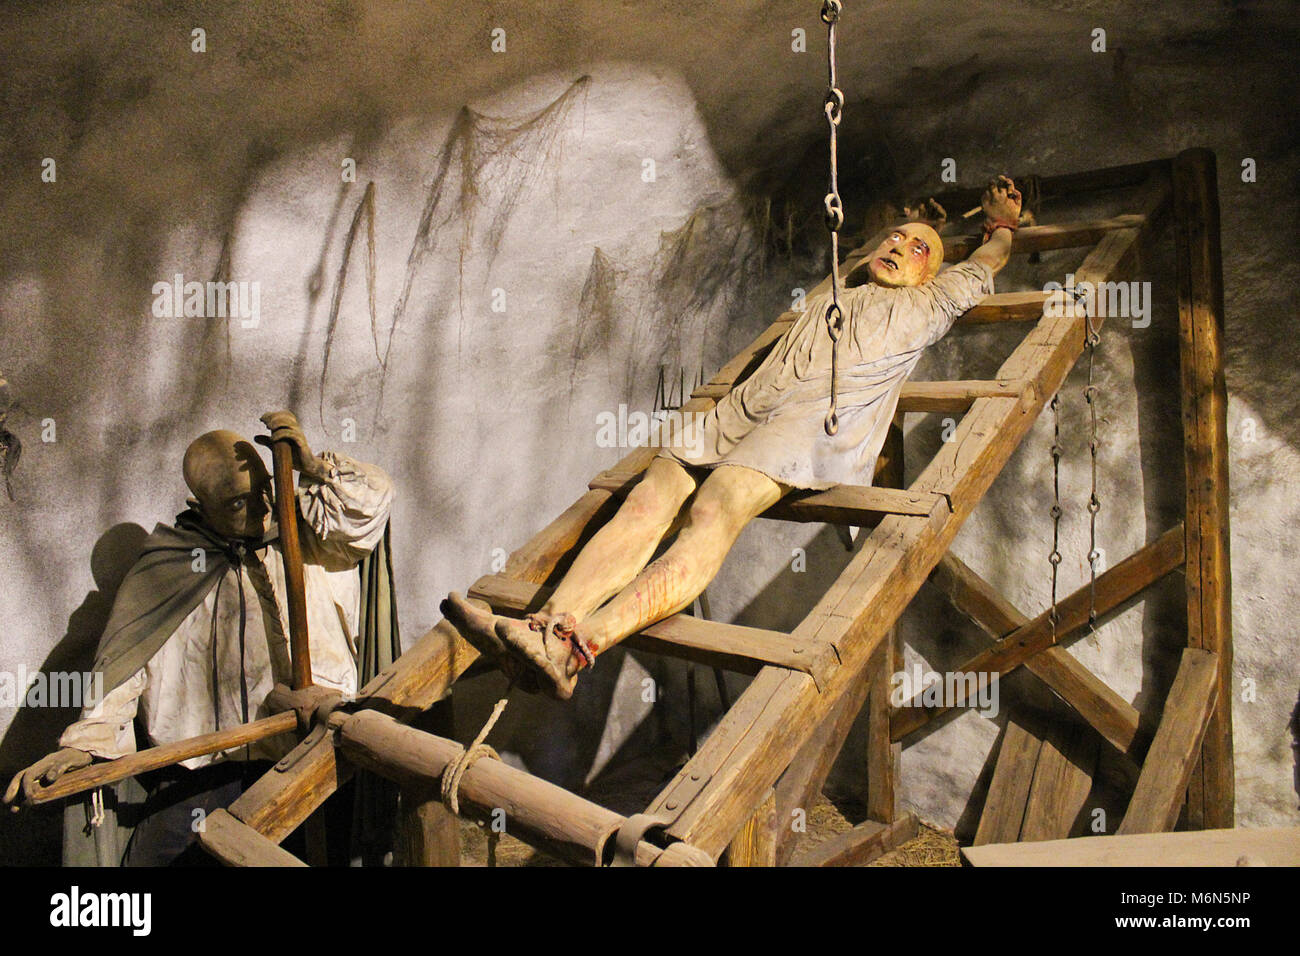 2017-09-01 - castle Loket, Czech republic, exhibition of torture, Old torture practice with ladder, dummy instalation Stock Photo